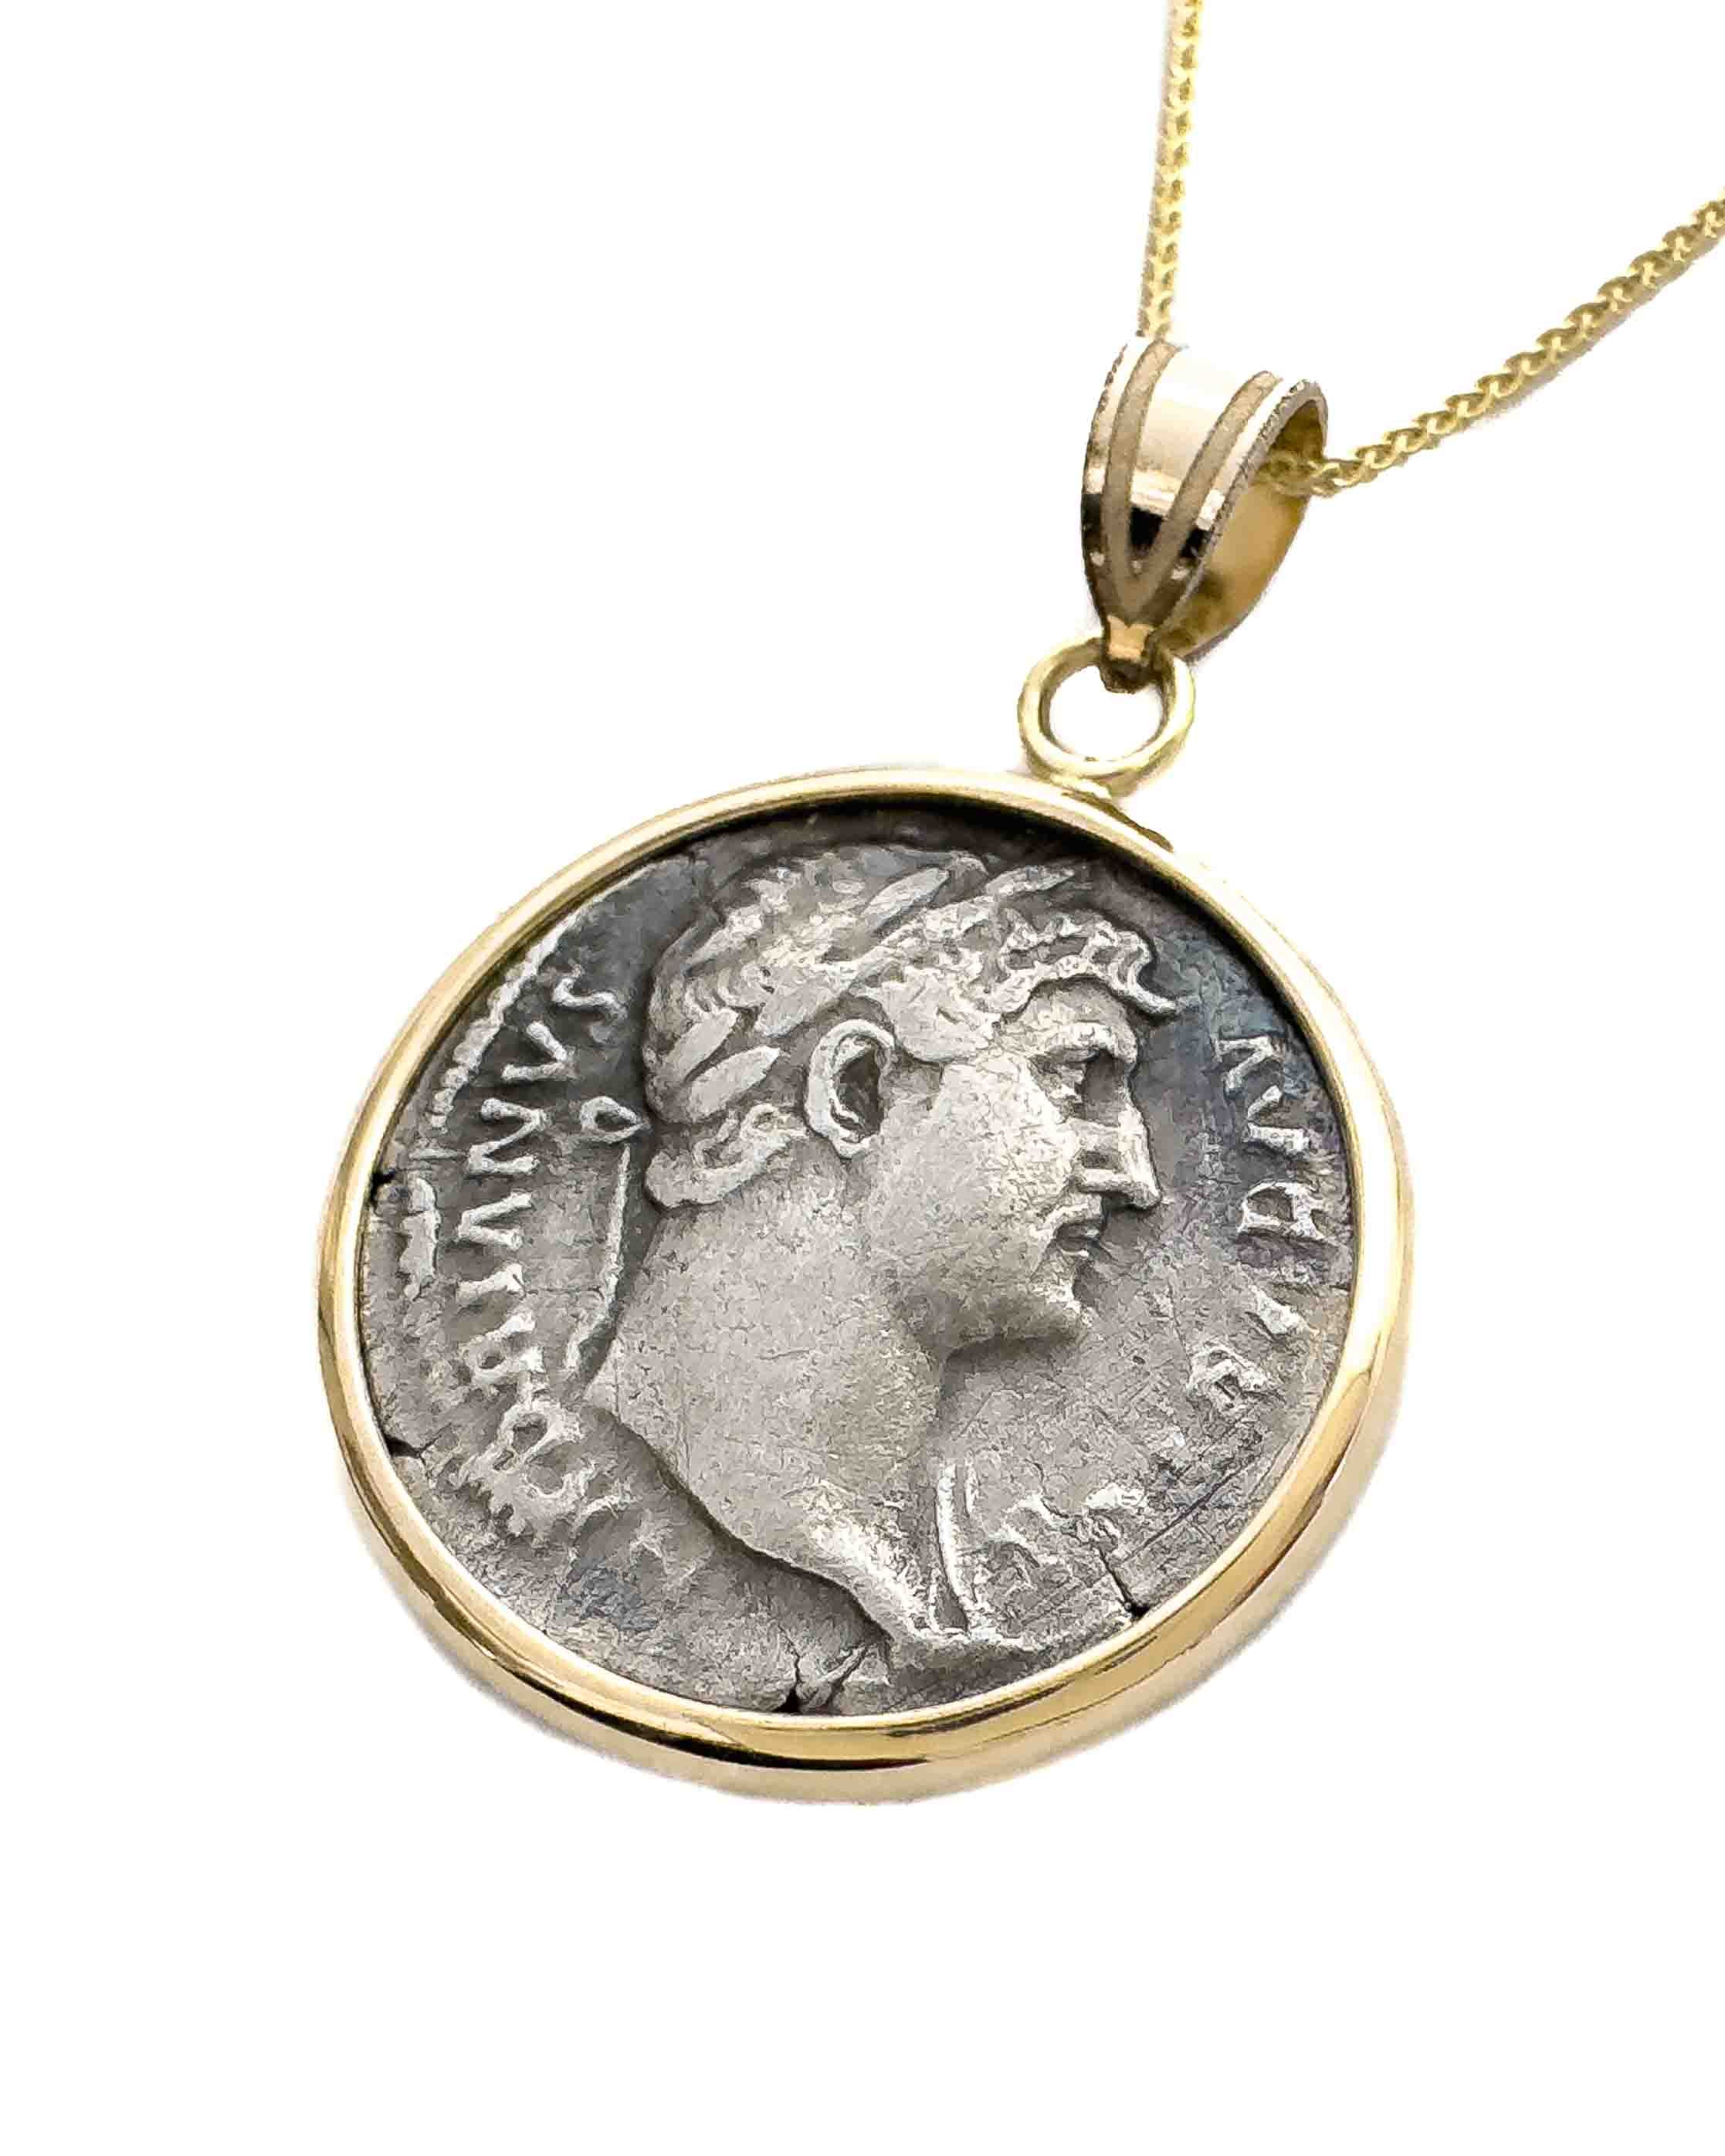 14k Gold Genuine Ancient Roman Coin Necklace (Hadrian; 117-138 A.D.)